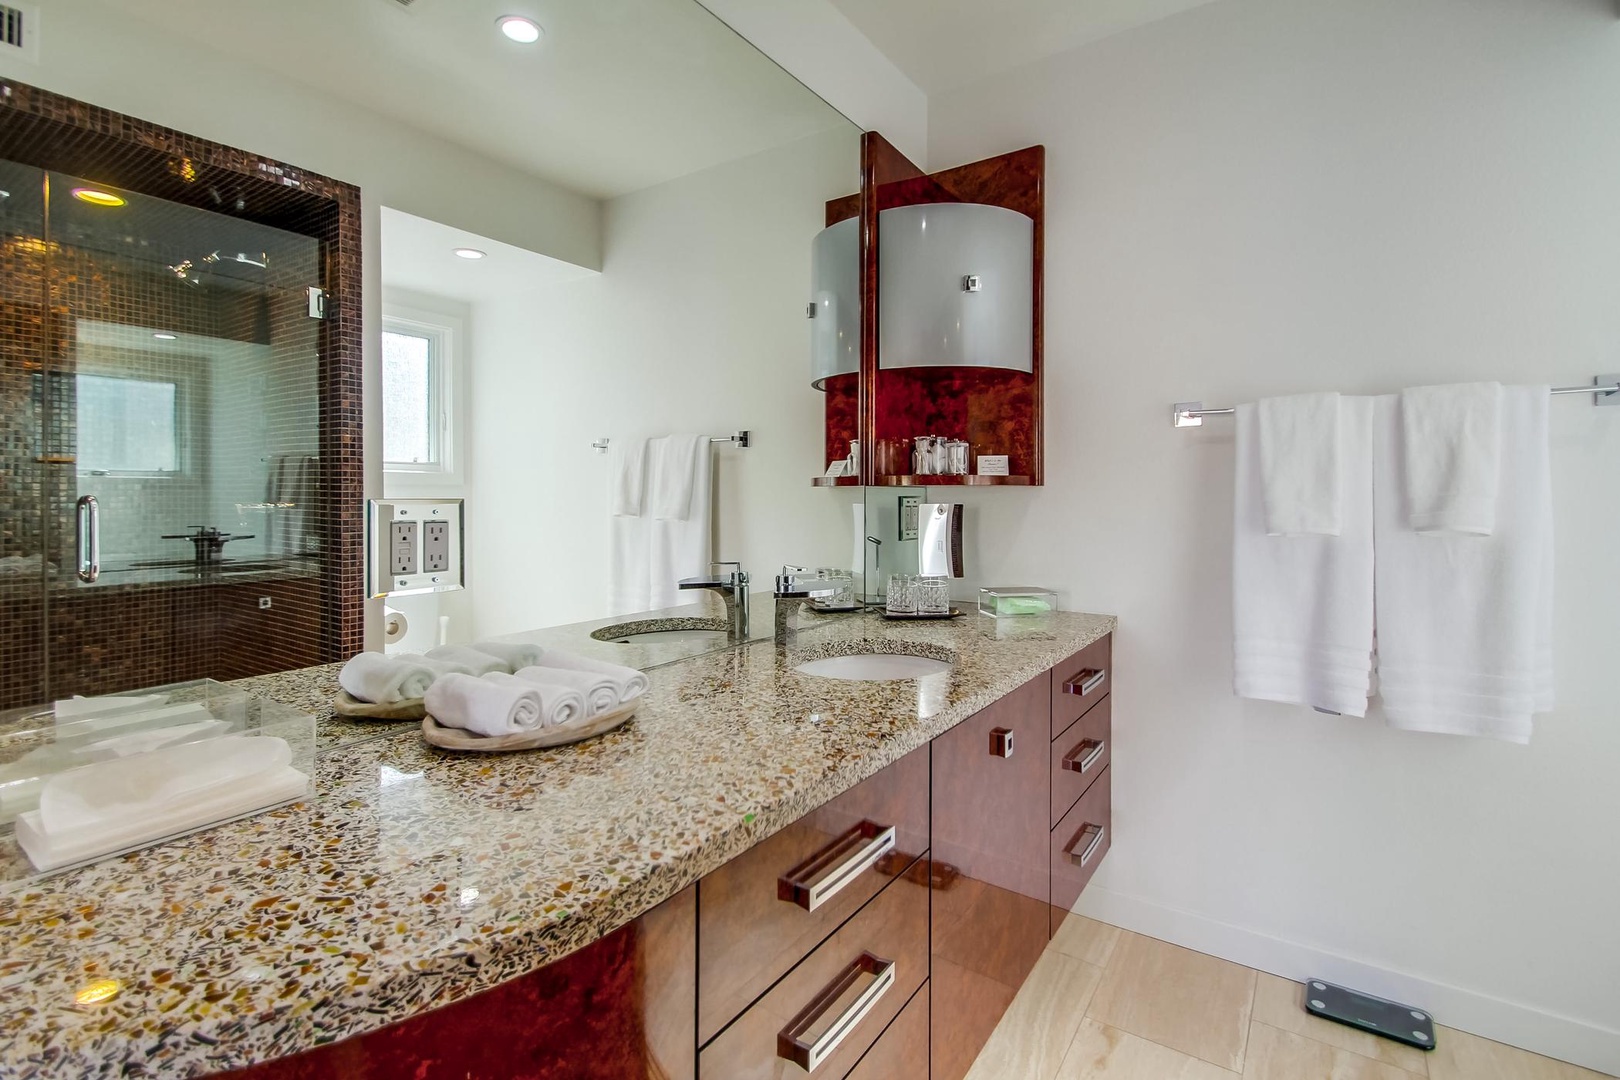 Primary bathroom with upscale finishes